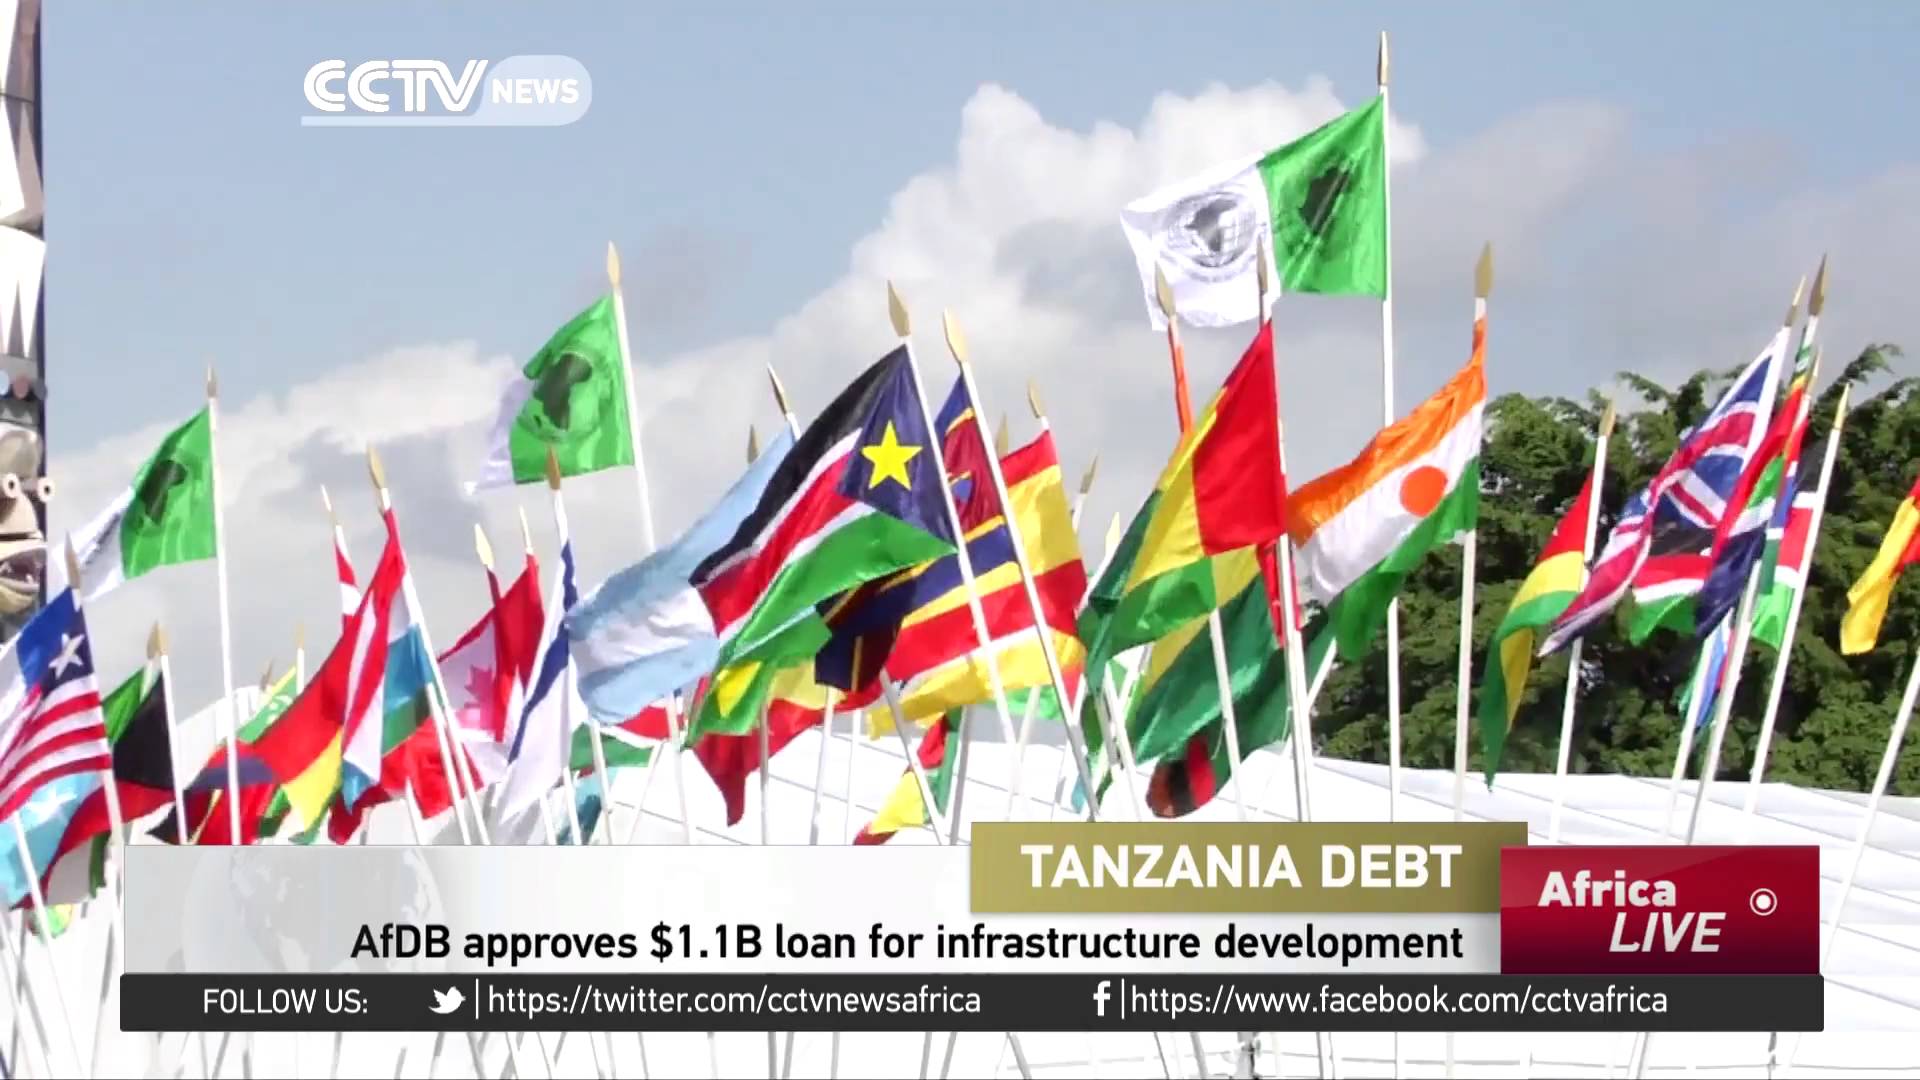 AfDB approves $1.1B loan for infrastructure development in Tanzania